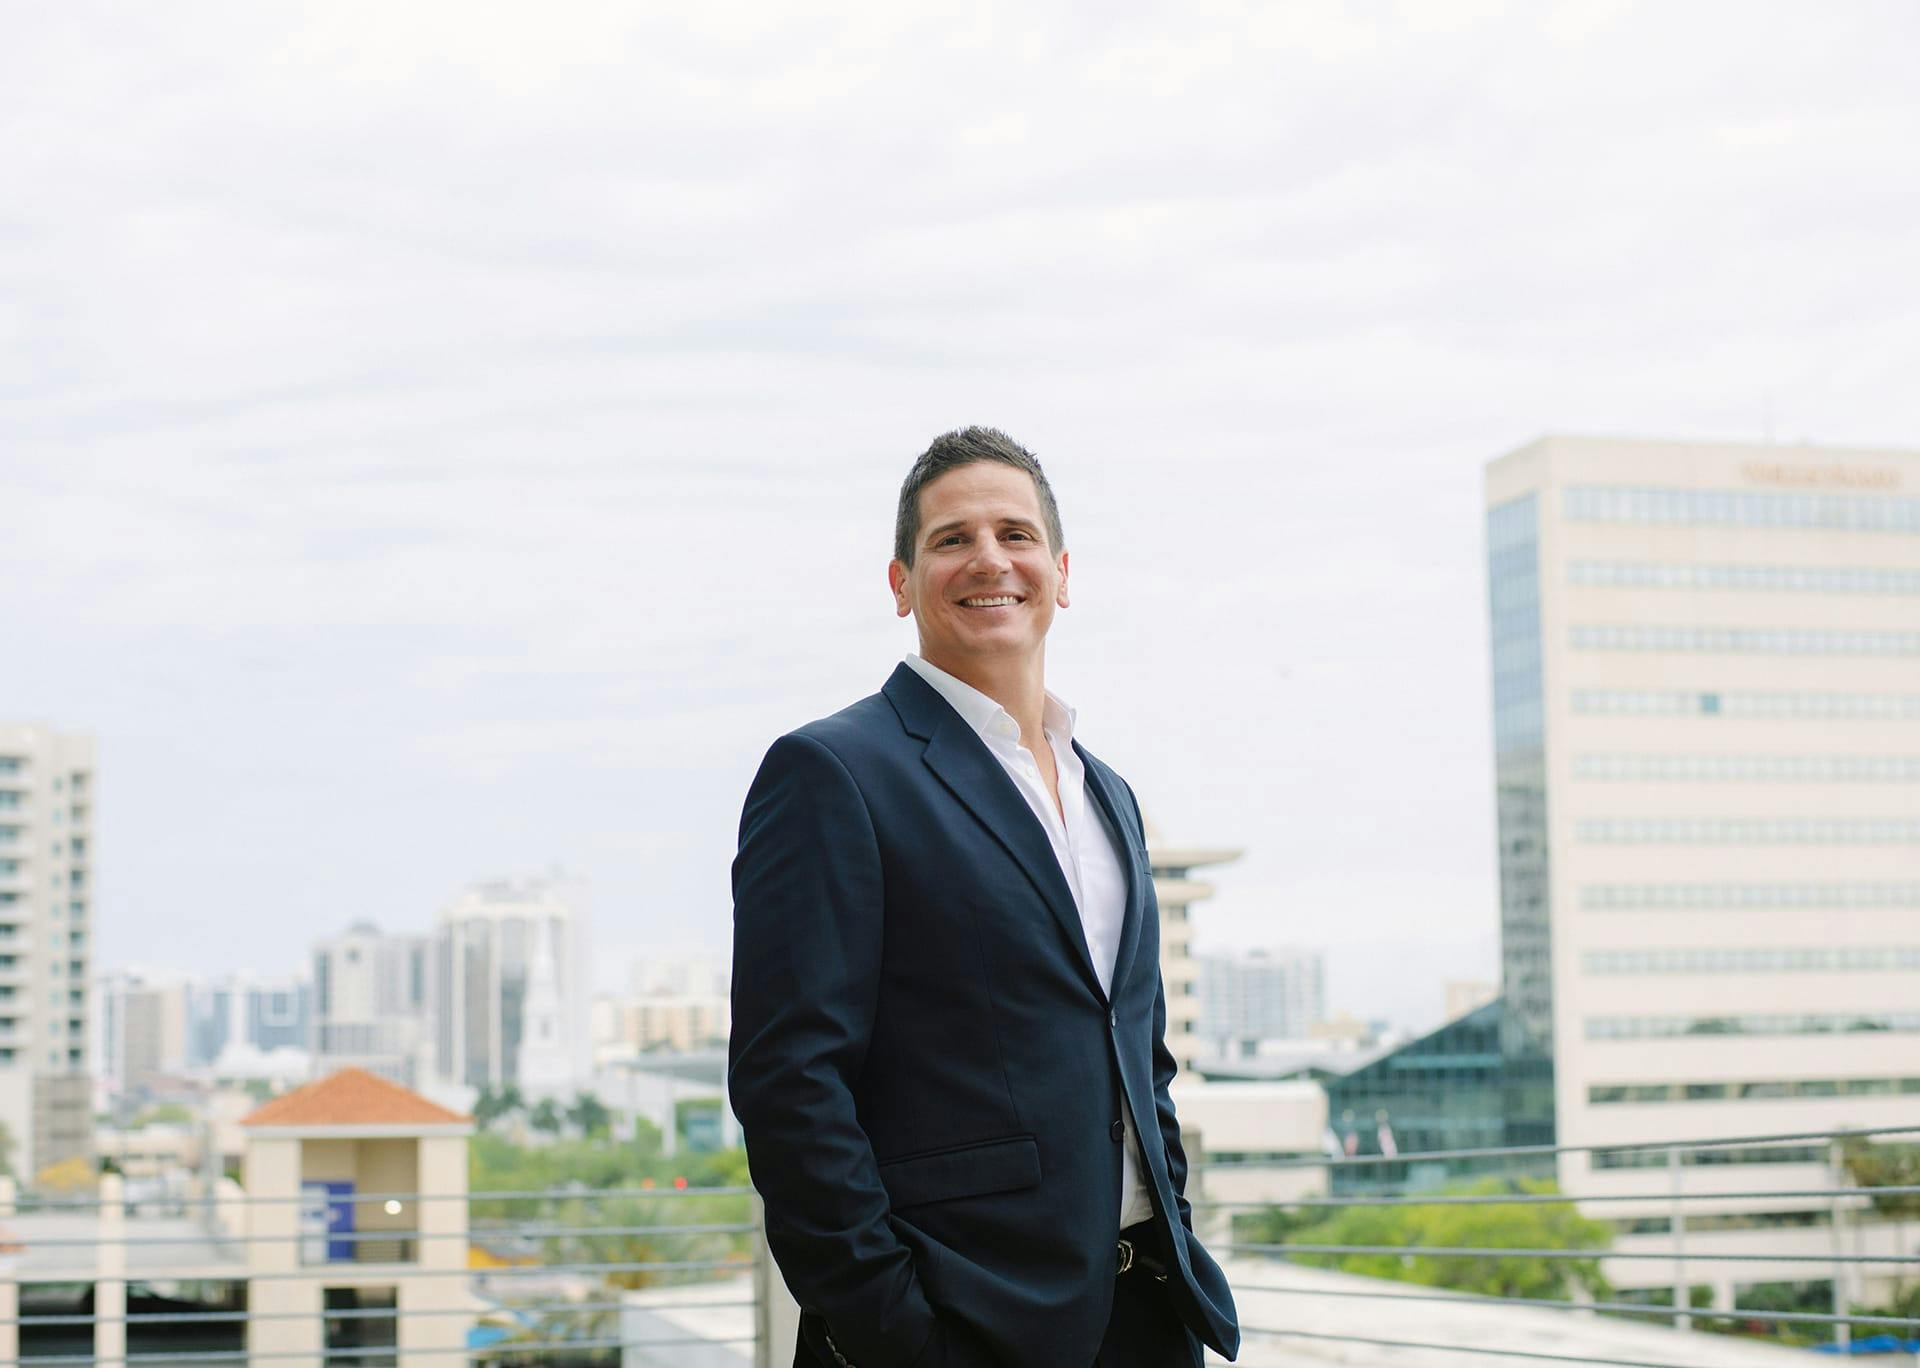 Dr. Joseph Greco, III with buildings in the background